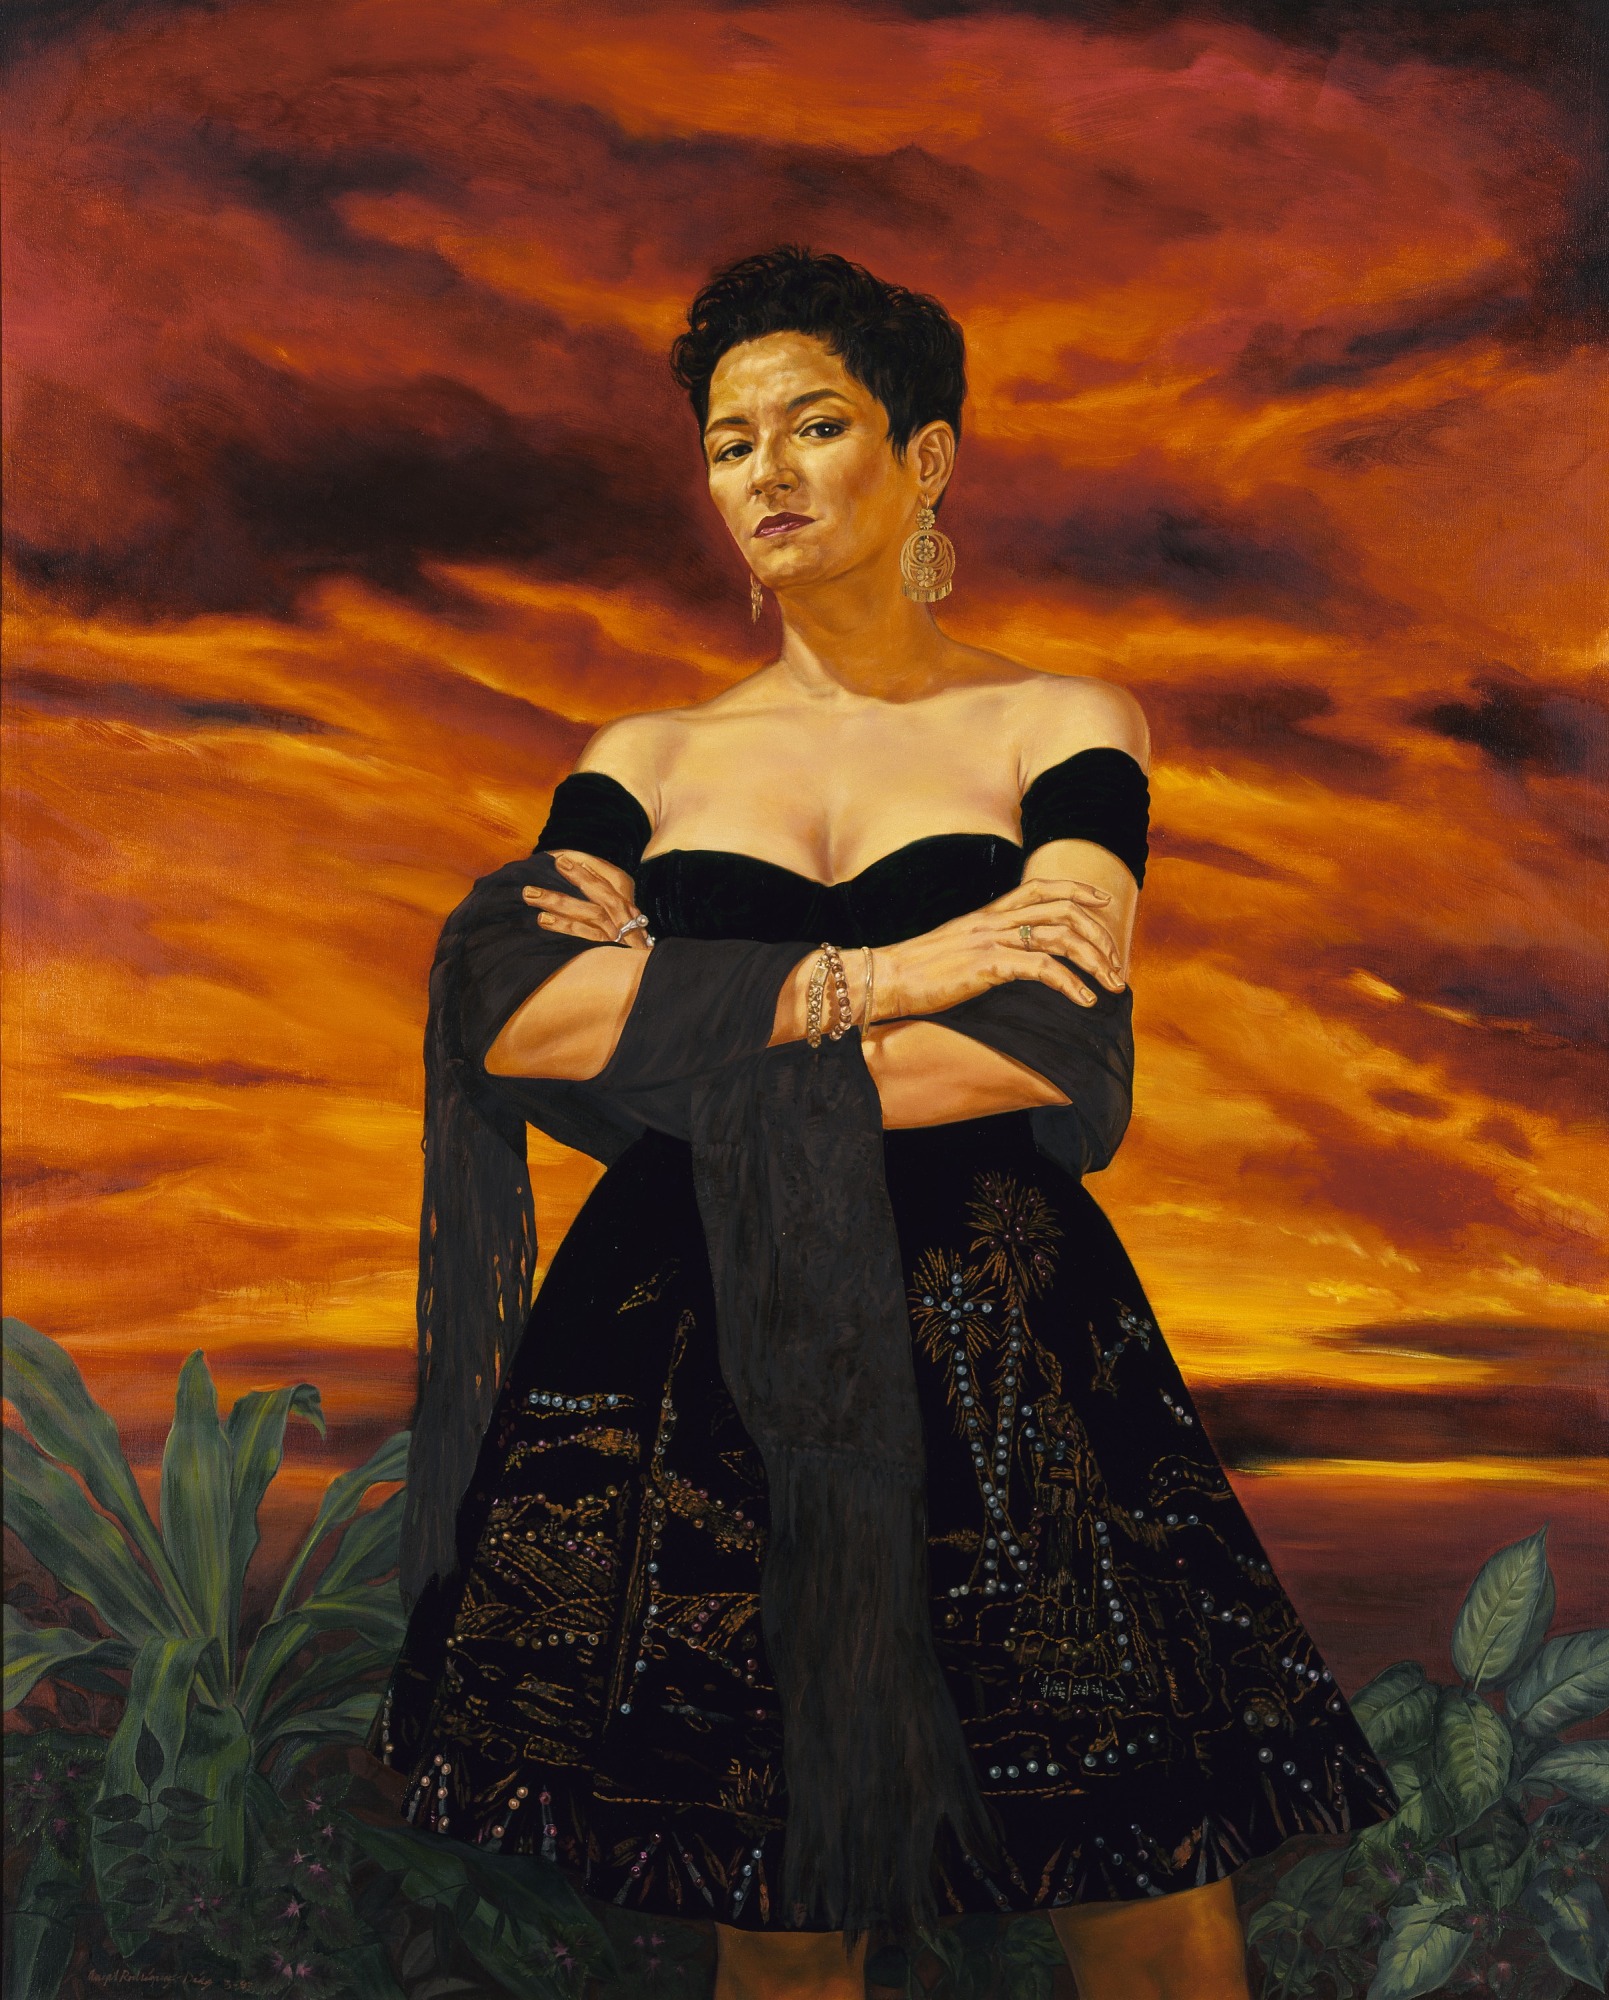 This life-size painting depicts a realistic portrait of a Chicana woman looking down at us, shown from the knees up, in a black strapless dress with a black shawl draped over her forearms. She is wearing dangling earrings, bracelets and rings, and the A-line skirt of her dress is embellished with a pattern of blue dots. Her arms are crossed and she is standing in a field with green plants beside her. The dramatic, orange-and-brown sky and clouds in the background fill most of the canvas behind and around her.